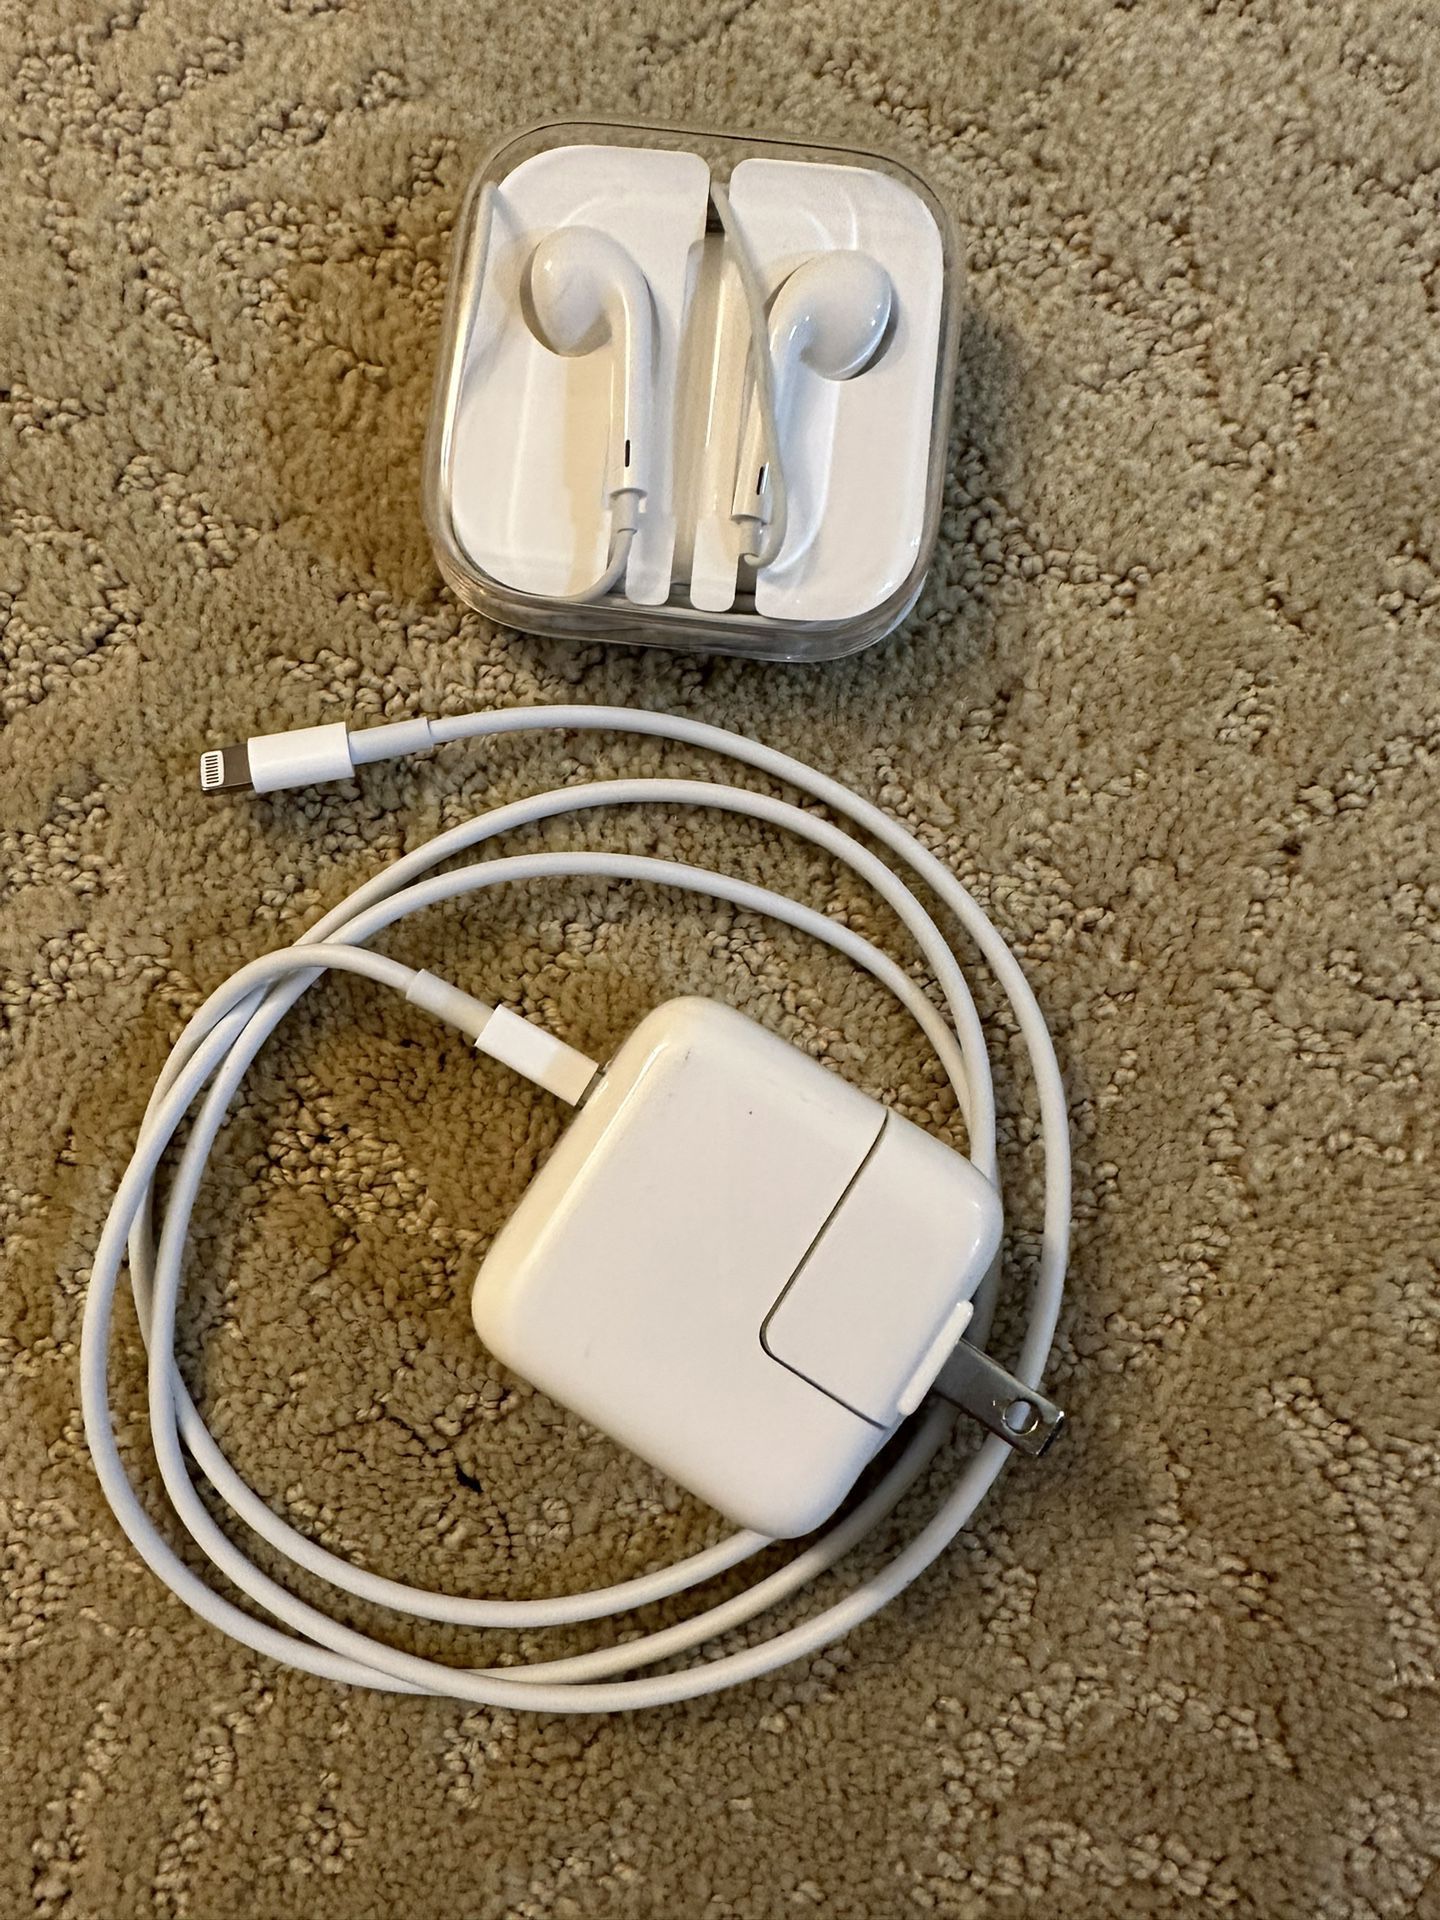 Apple USB Charger and Lightning Cable and EarPods